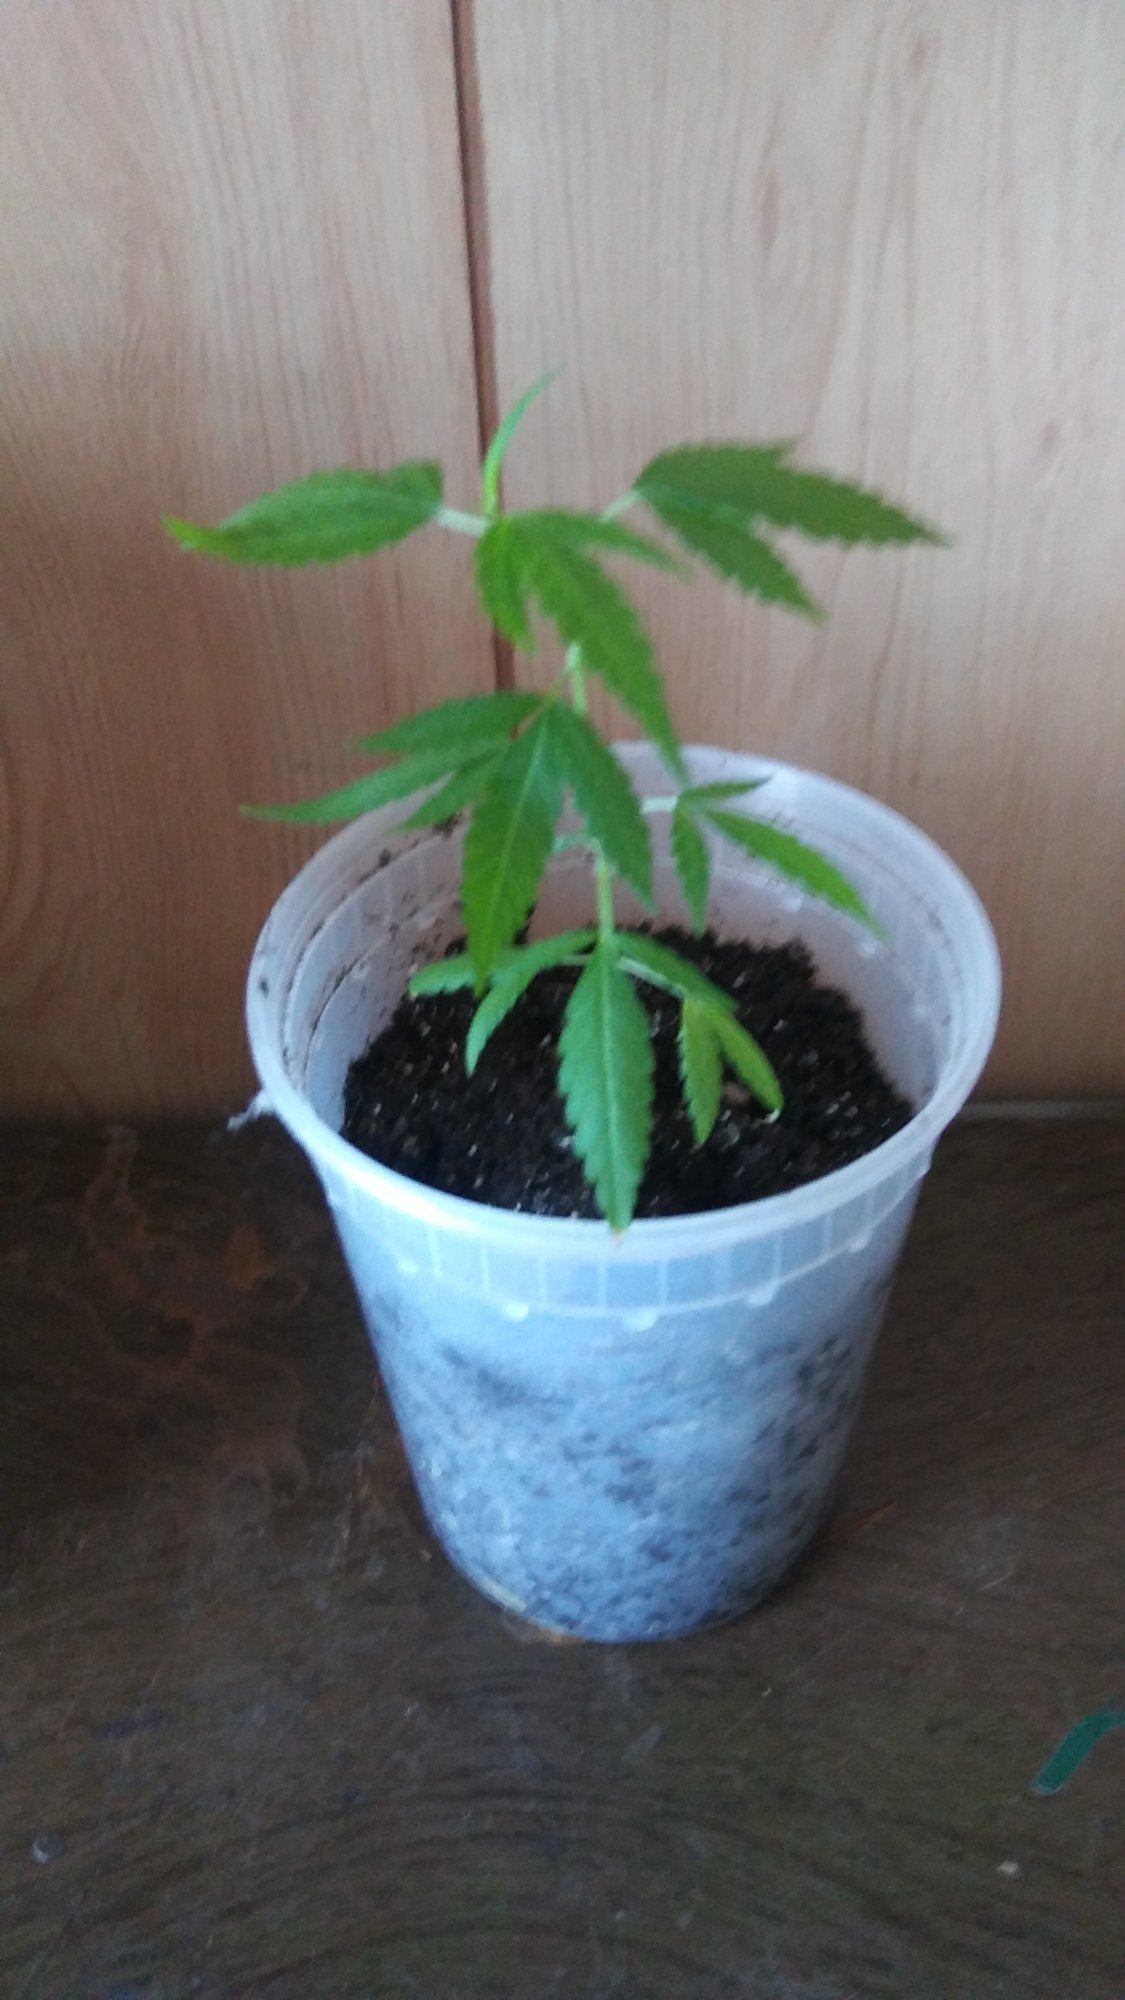 New grower would like tips 6 inch plant and 2 seeds given to me 3